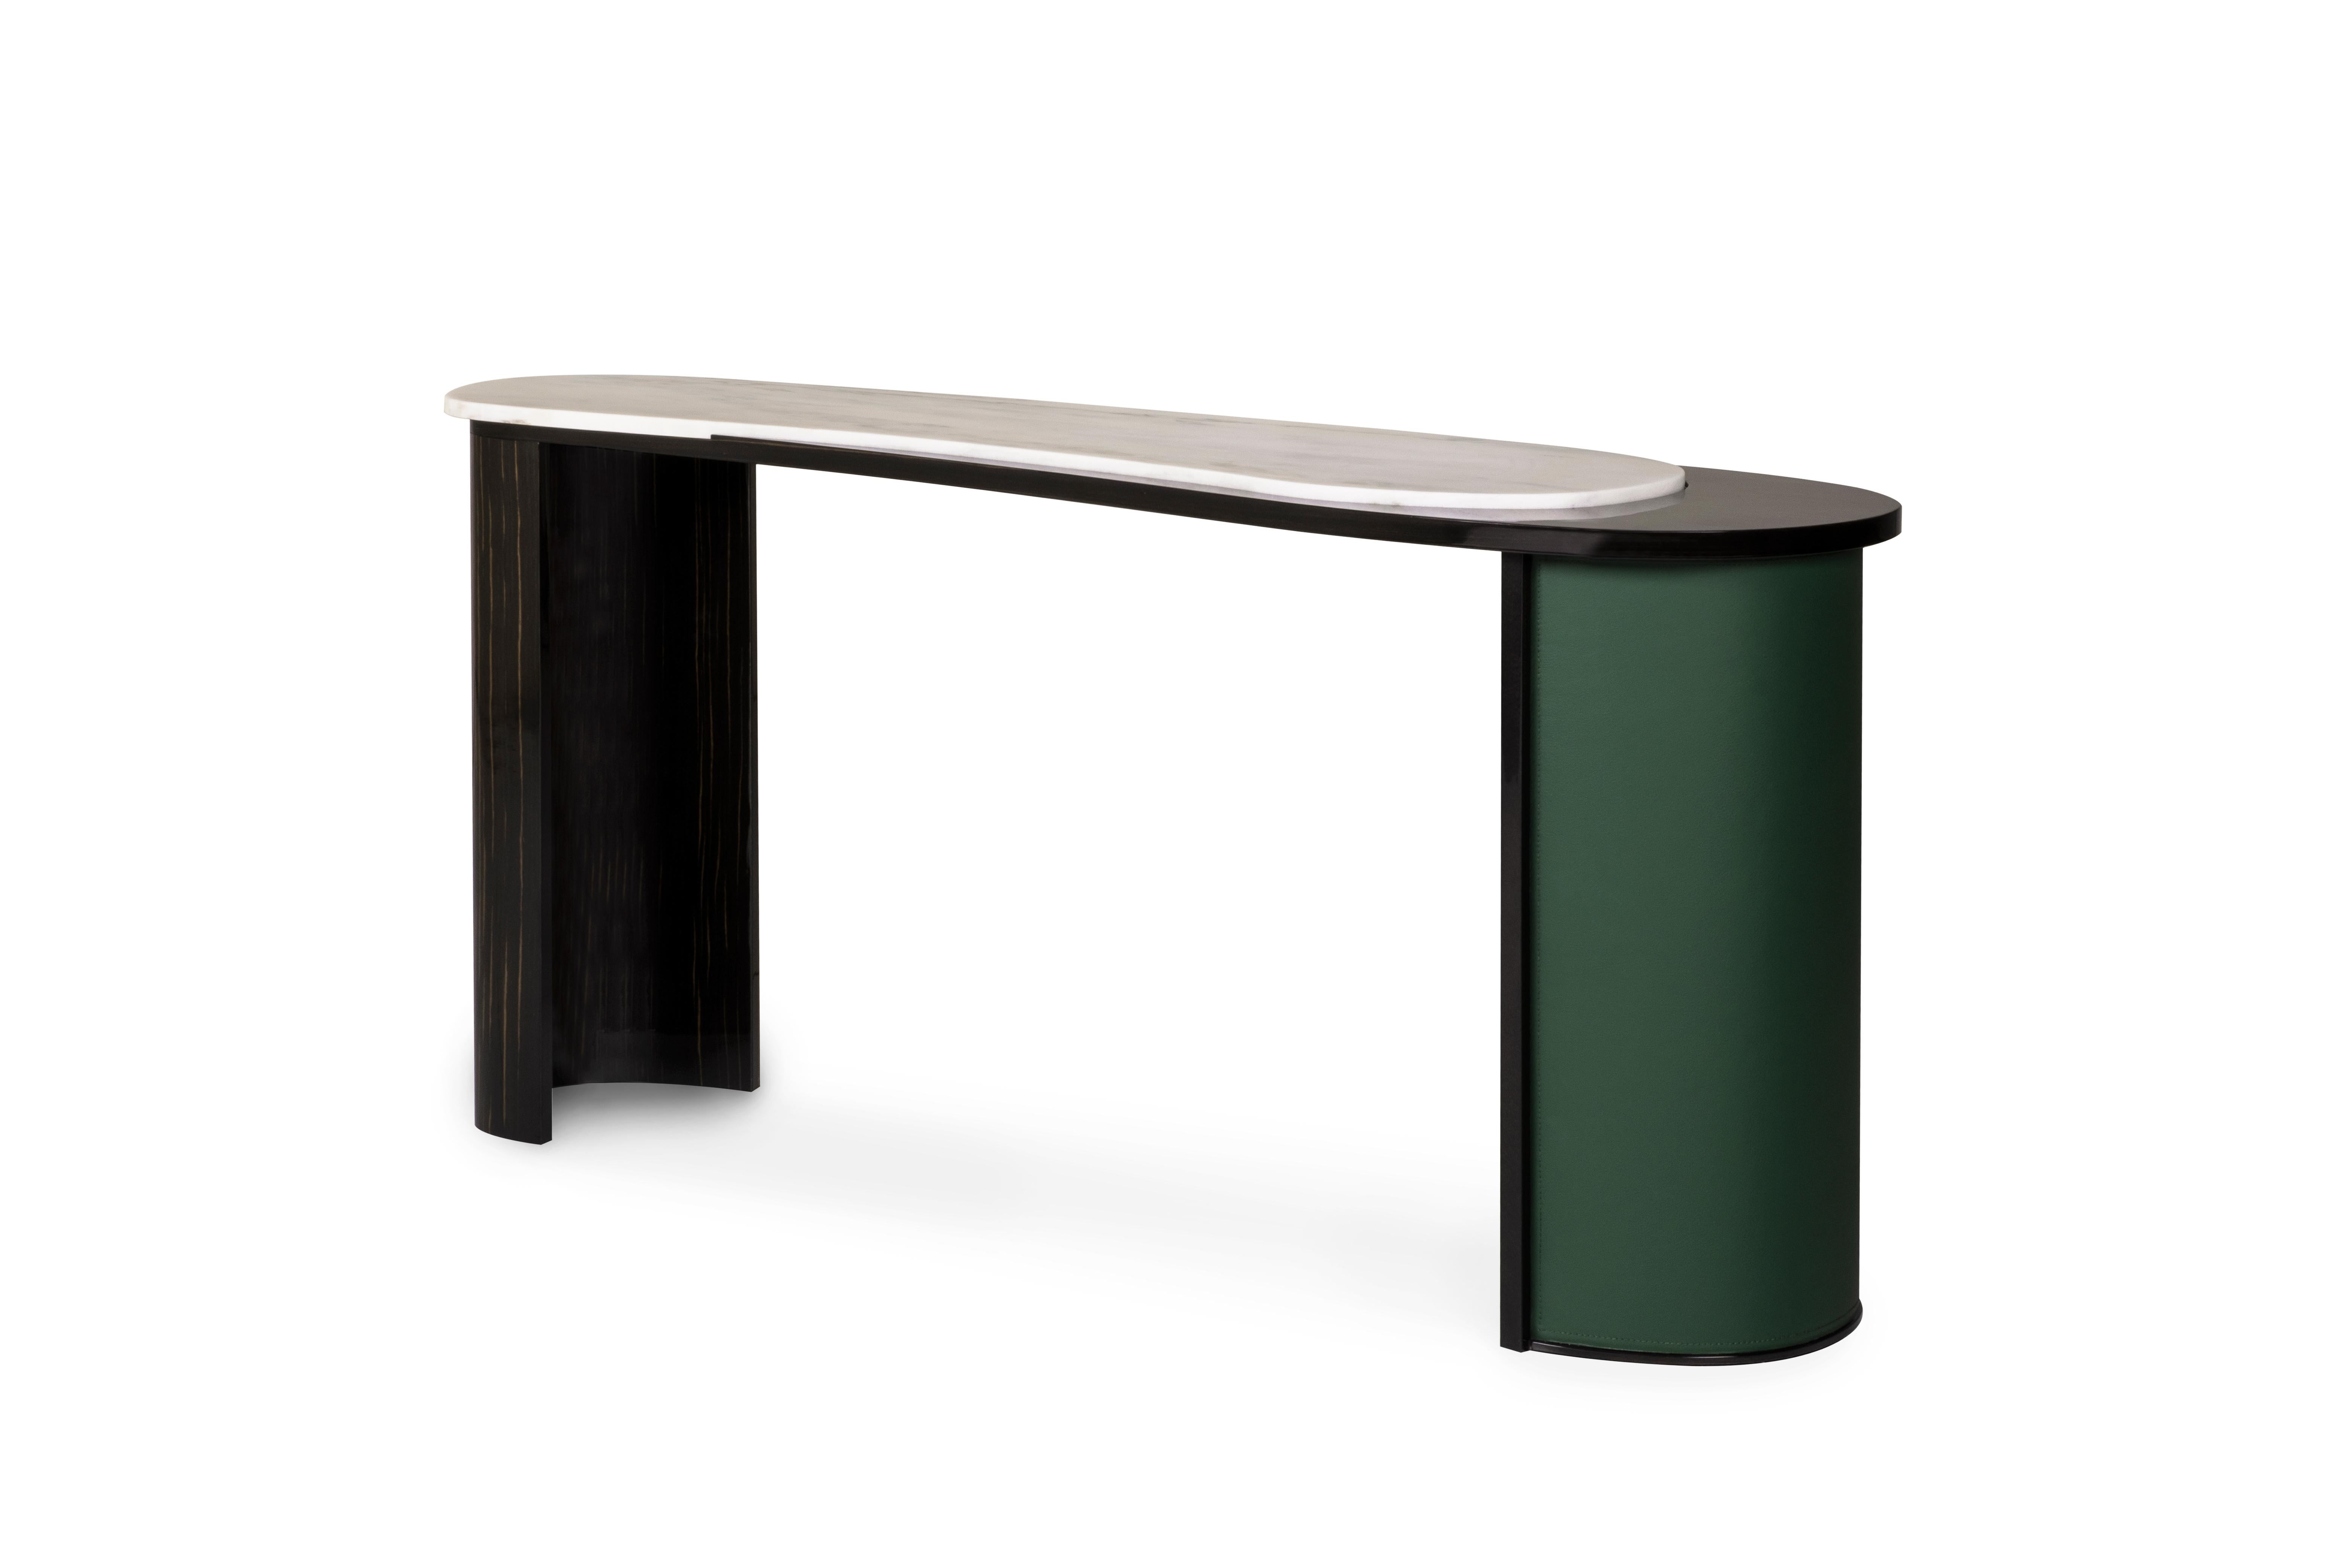 Arco da Augusta Console, Contemporary Collection, Handcrafted in Portugal - Europe by Greenapple.

Inspired by Lisbon's historical arch and as a homage to the Portuguese architecture, this console enhances any interior with its natural artistic